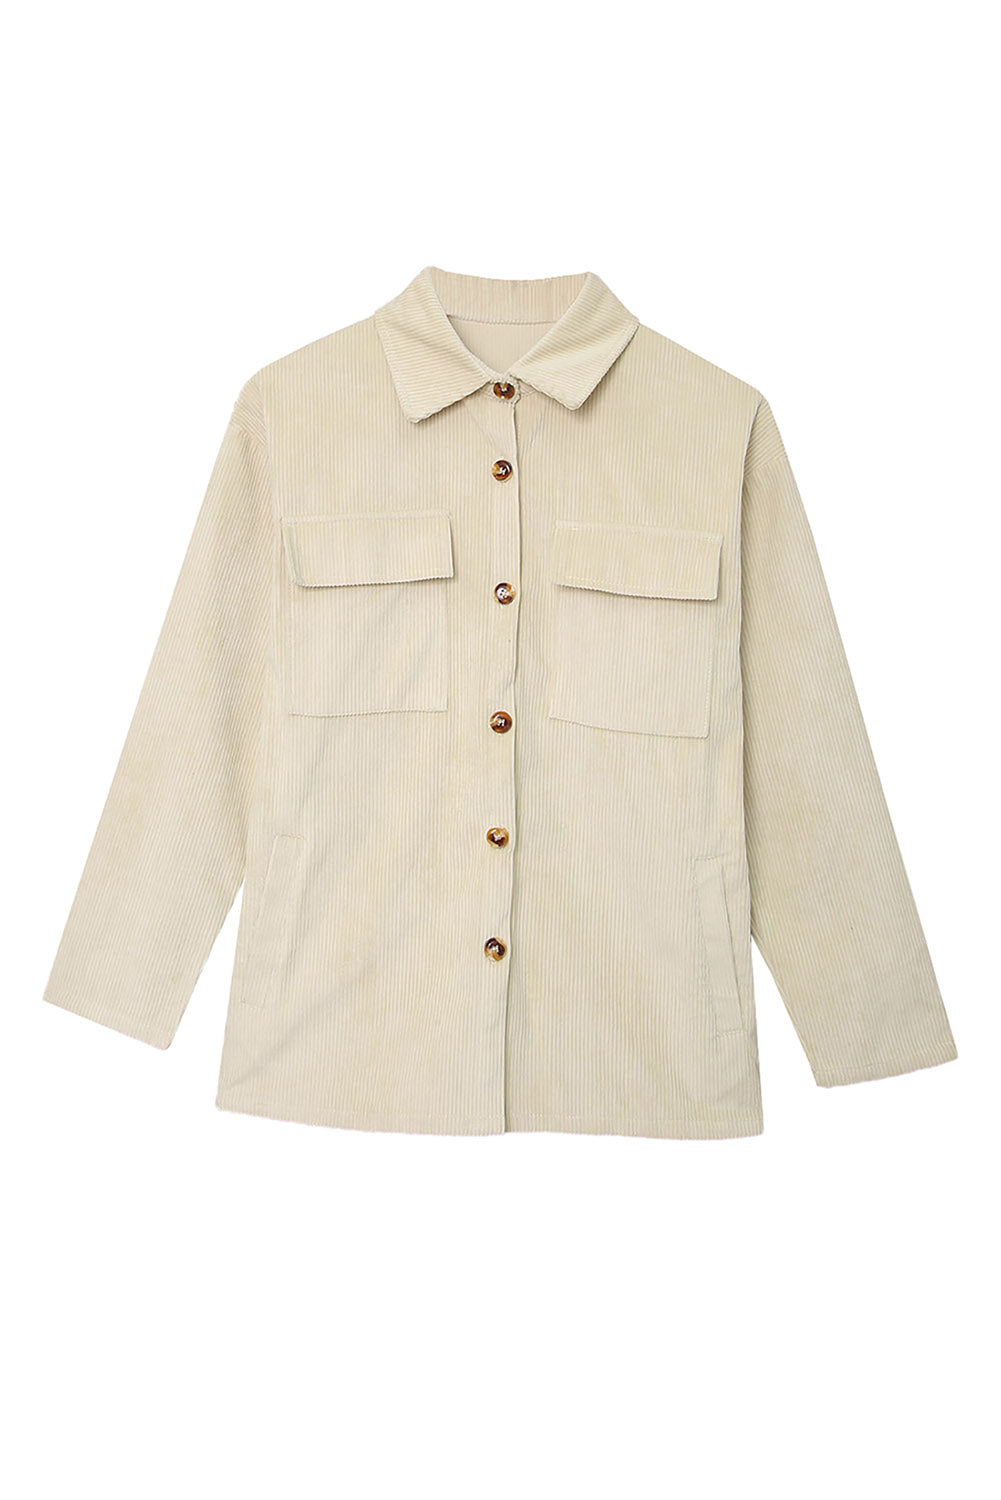 Cali Chic Beige Pocketed Button Ribbed Textured Shacket